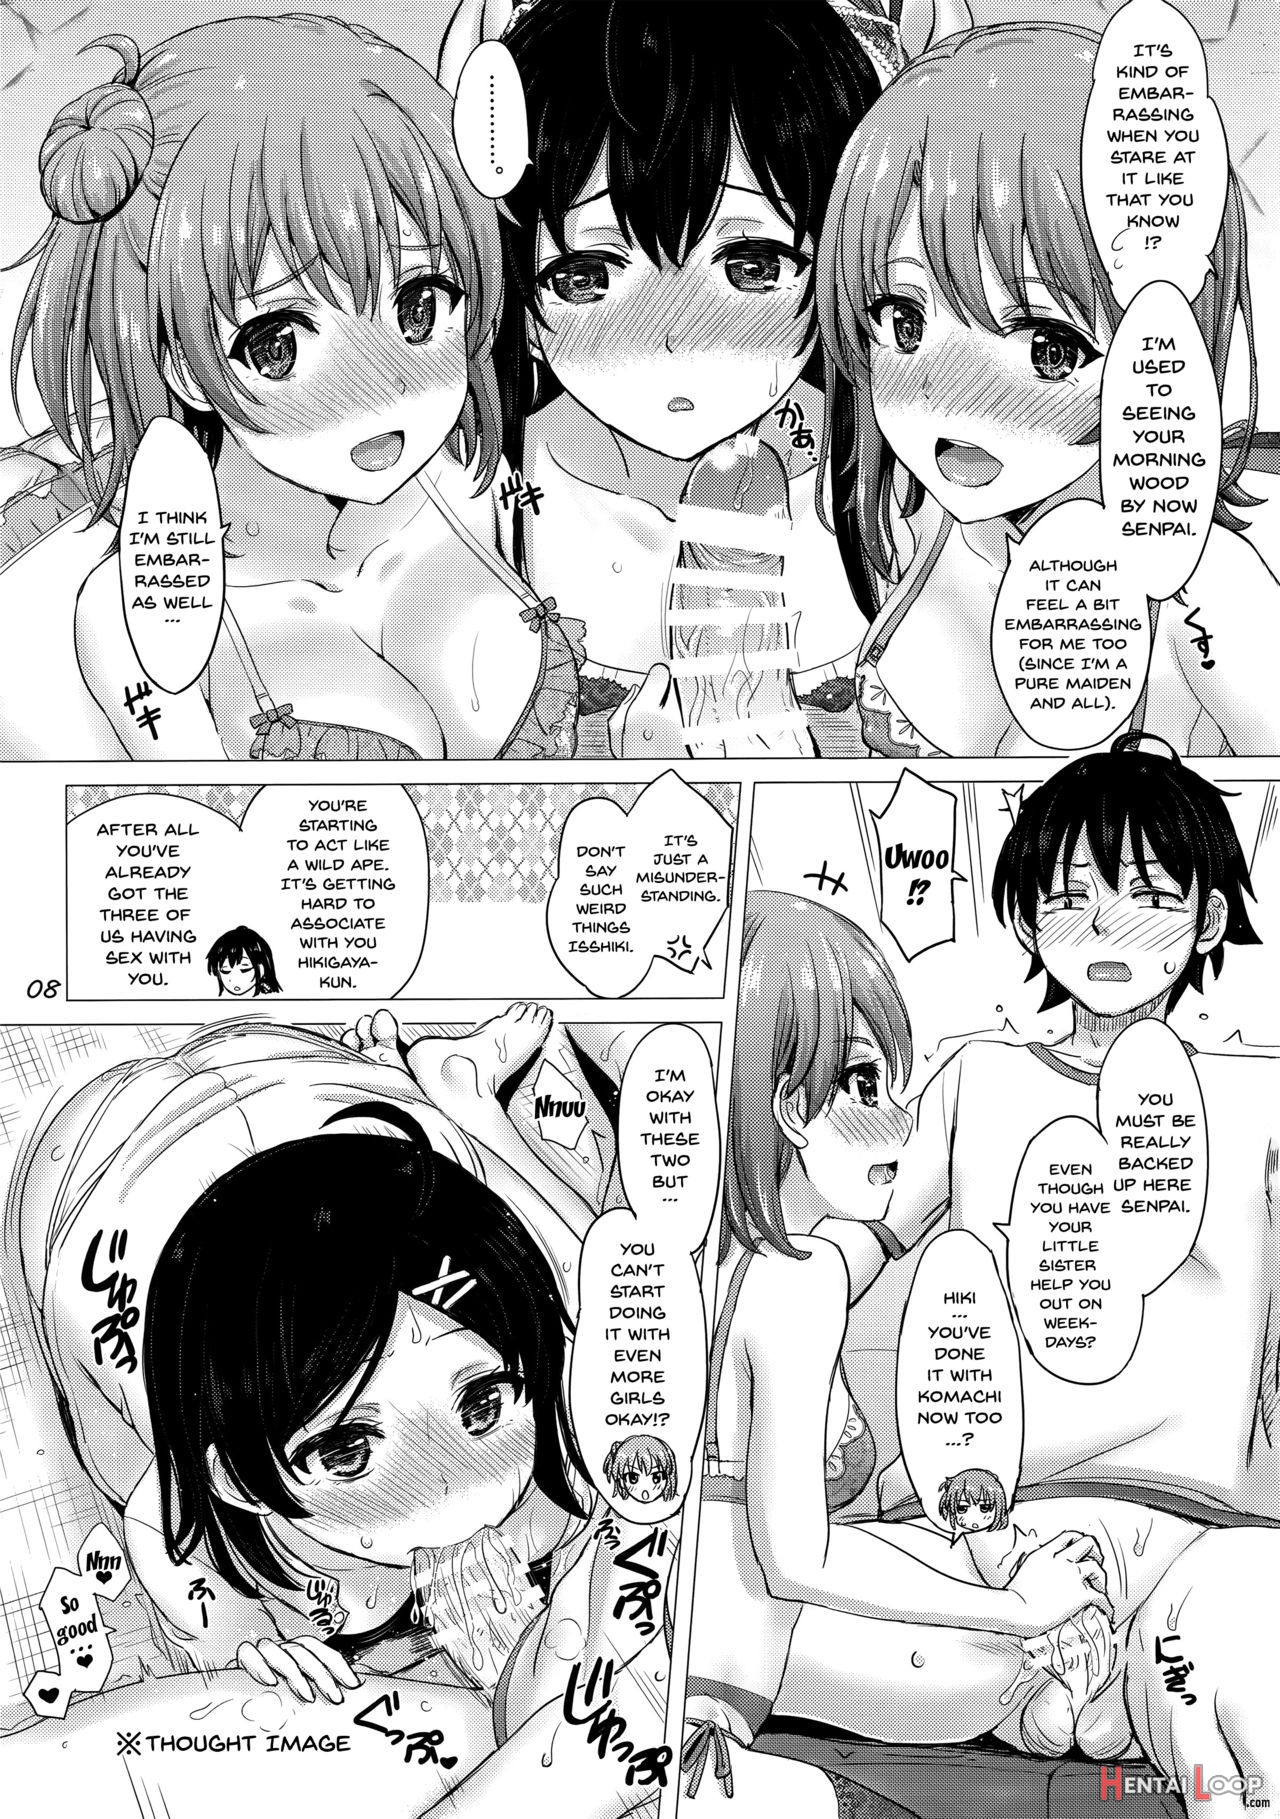 The Lewd Girls From The Service Club page 8